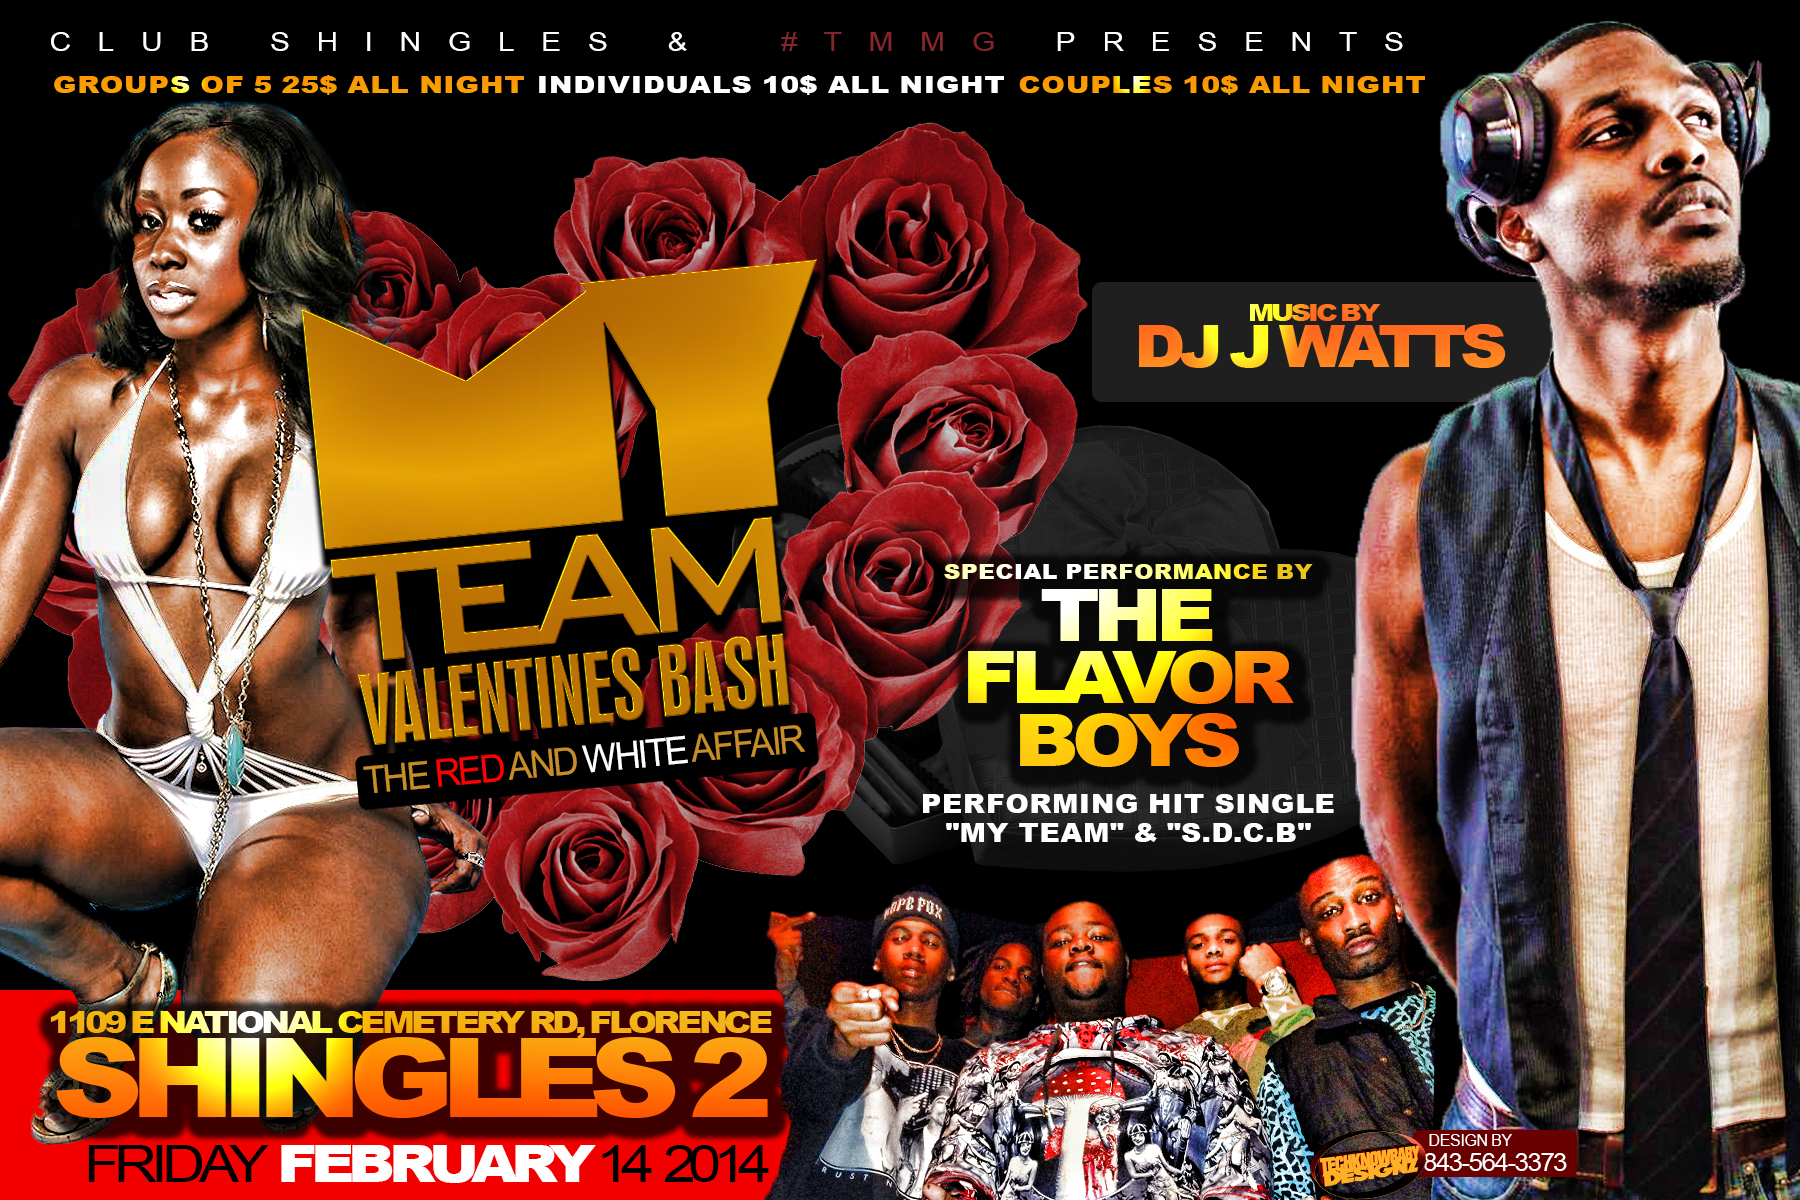 #Florence, SC Feb. 14 Shingles 2 My Team Valentines Bash **Special Performance By FlavorBoyz